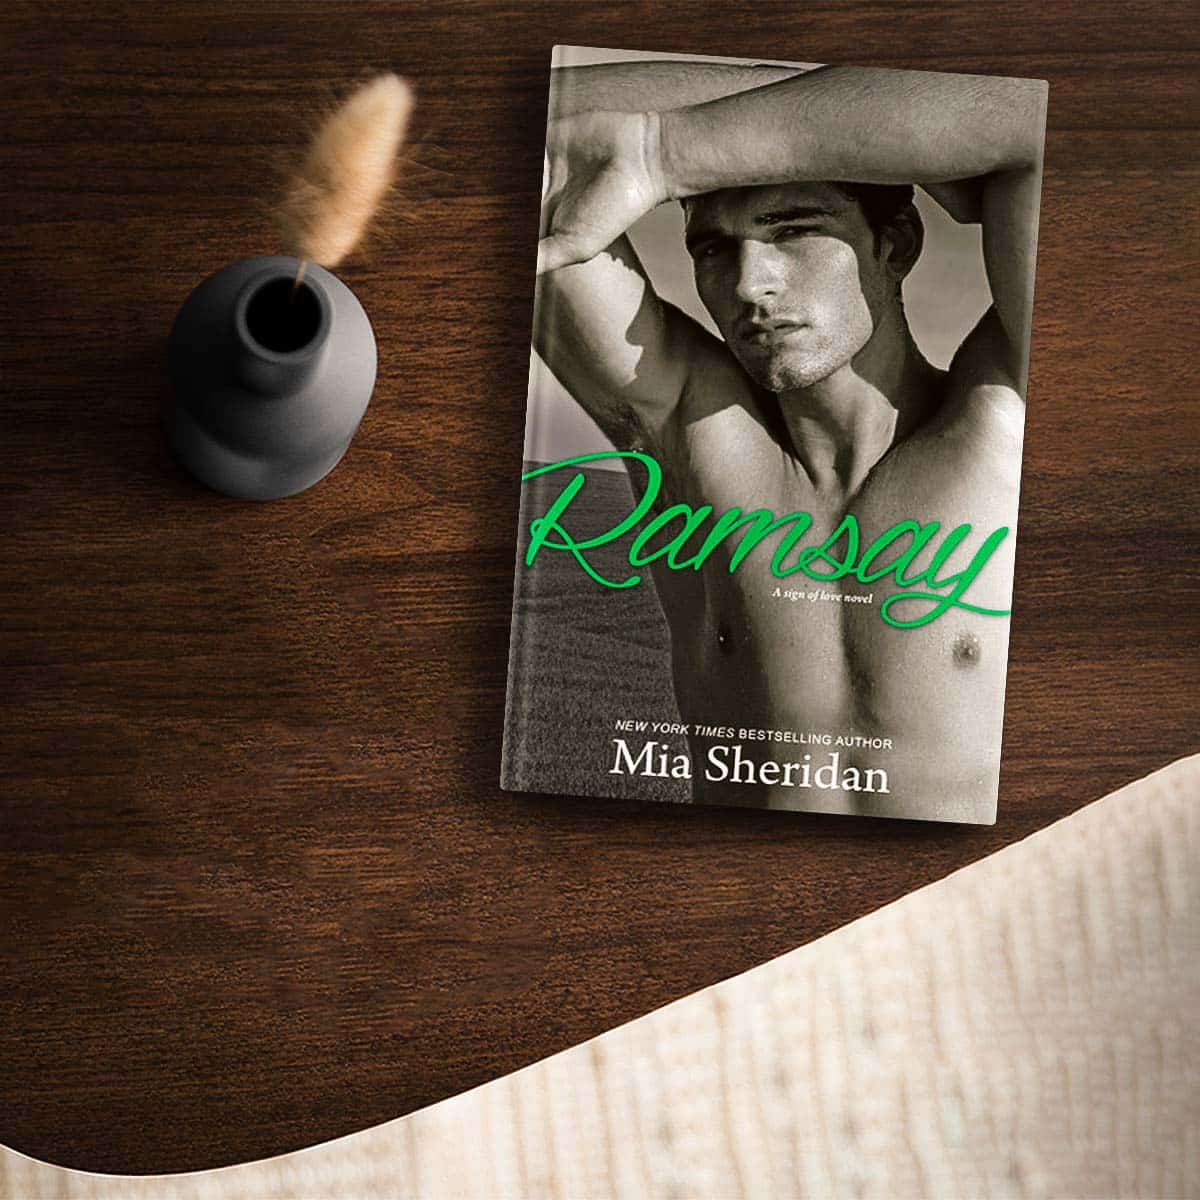 Ramsay by Mia Sheridan – A Hero Obsessed with Revenge